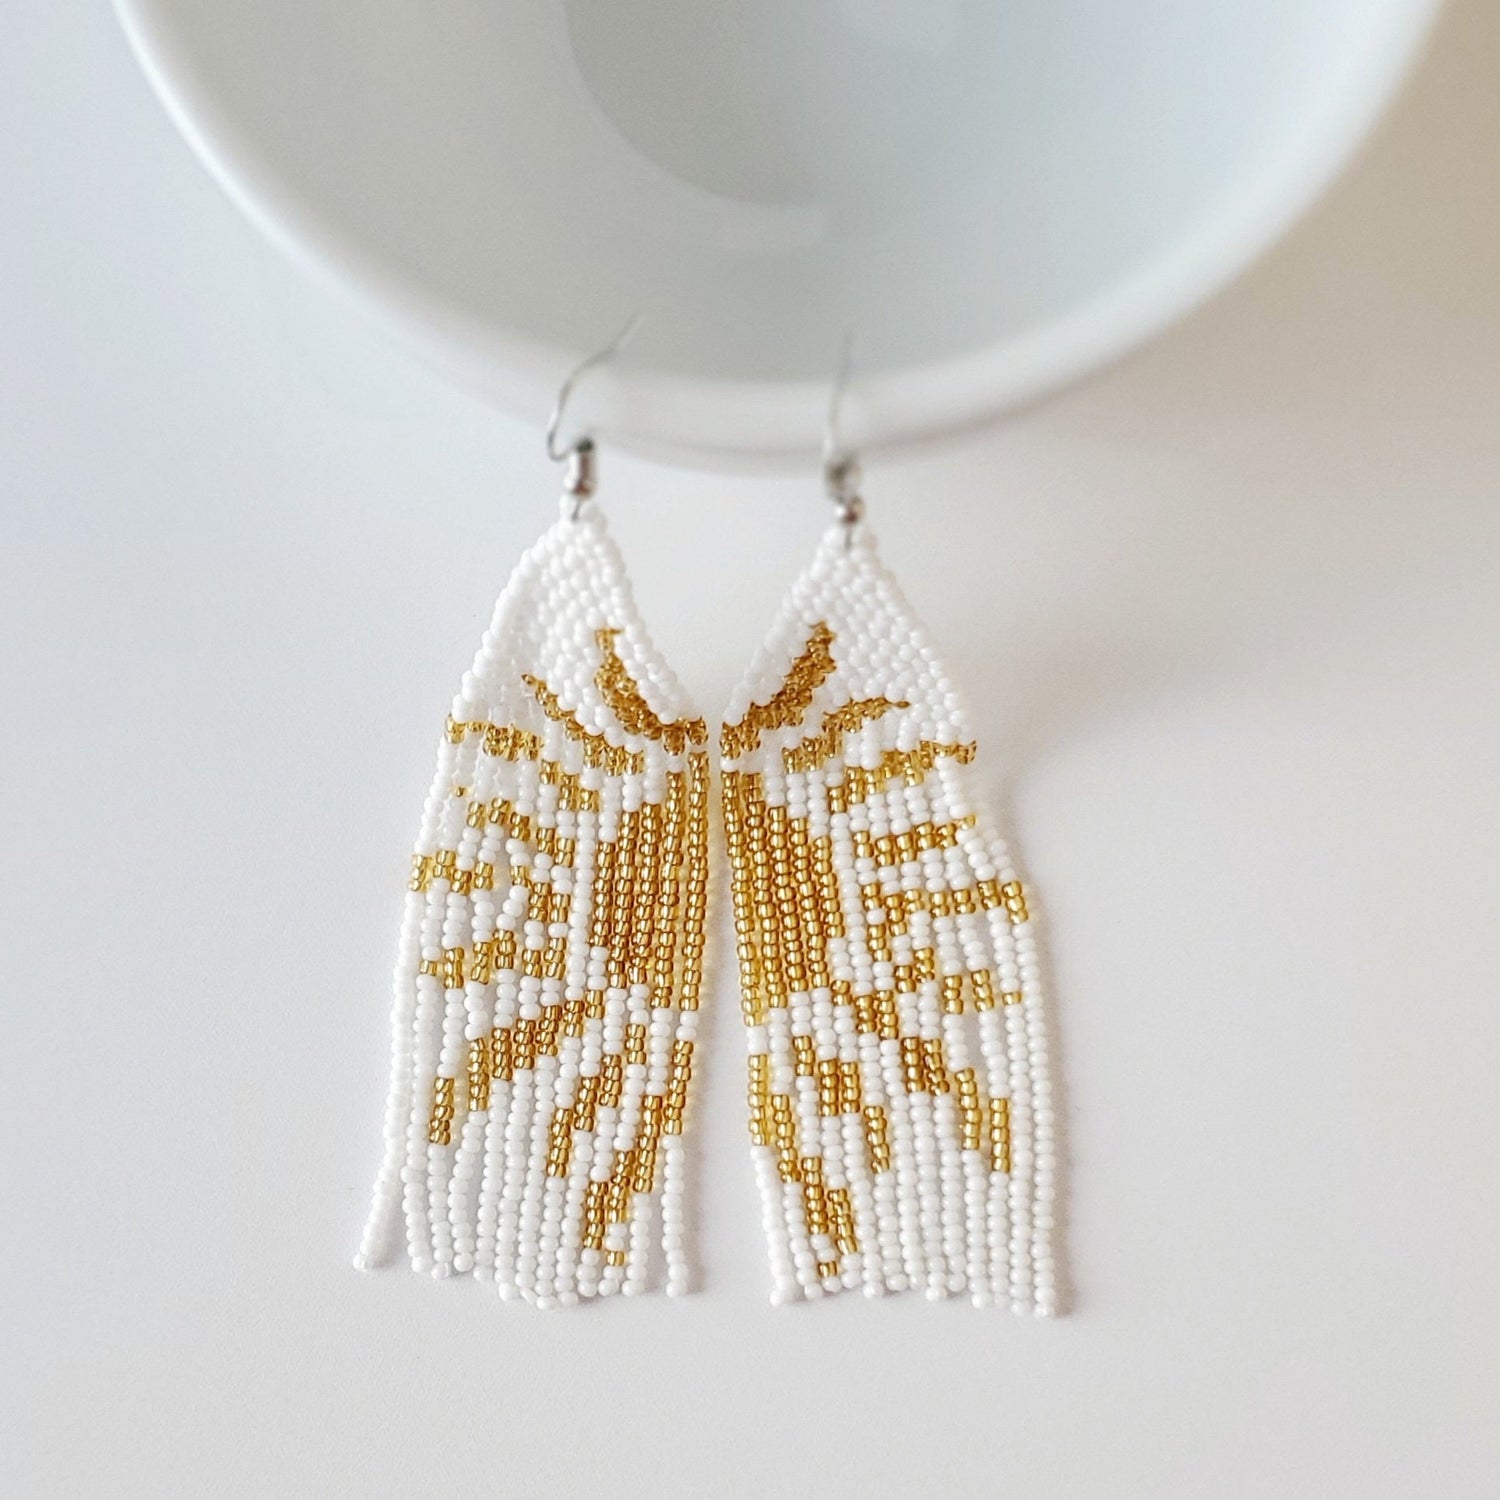 top middle is a shiny white ceramic bowl sitting on a white table. the bowl has 2 earrings with silver hooks hooked on to the edge of it. The earrings are 4.75" long with white seed beads and golden seed beads woven into a sun 